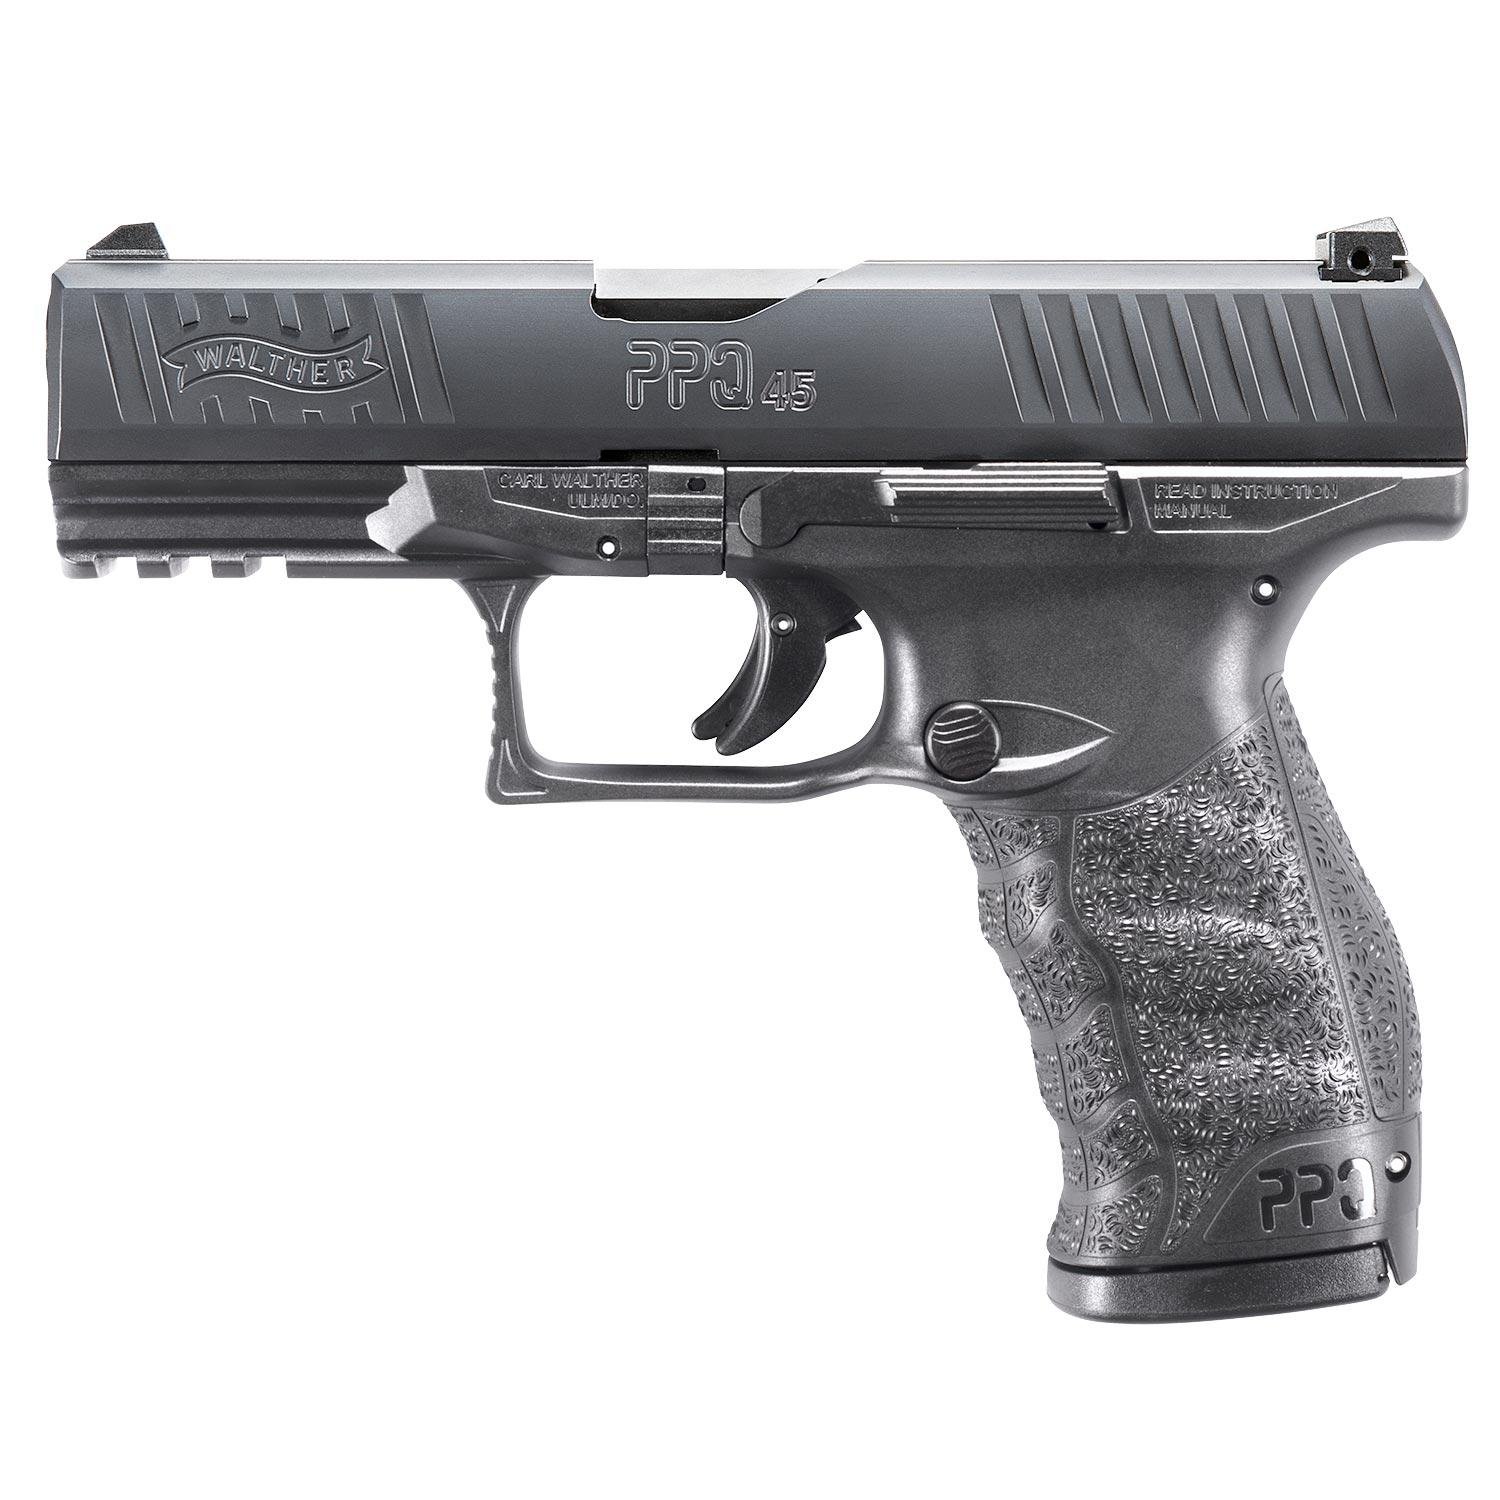 WALTHER PPQ M2 45ACP 4IN - $649.99 (add to cart to get this price)